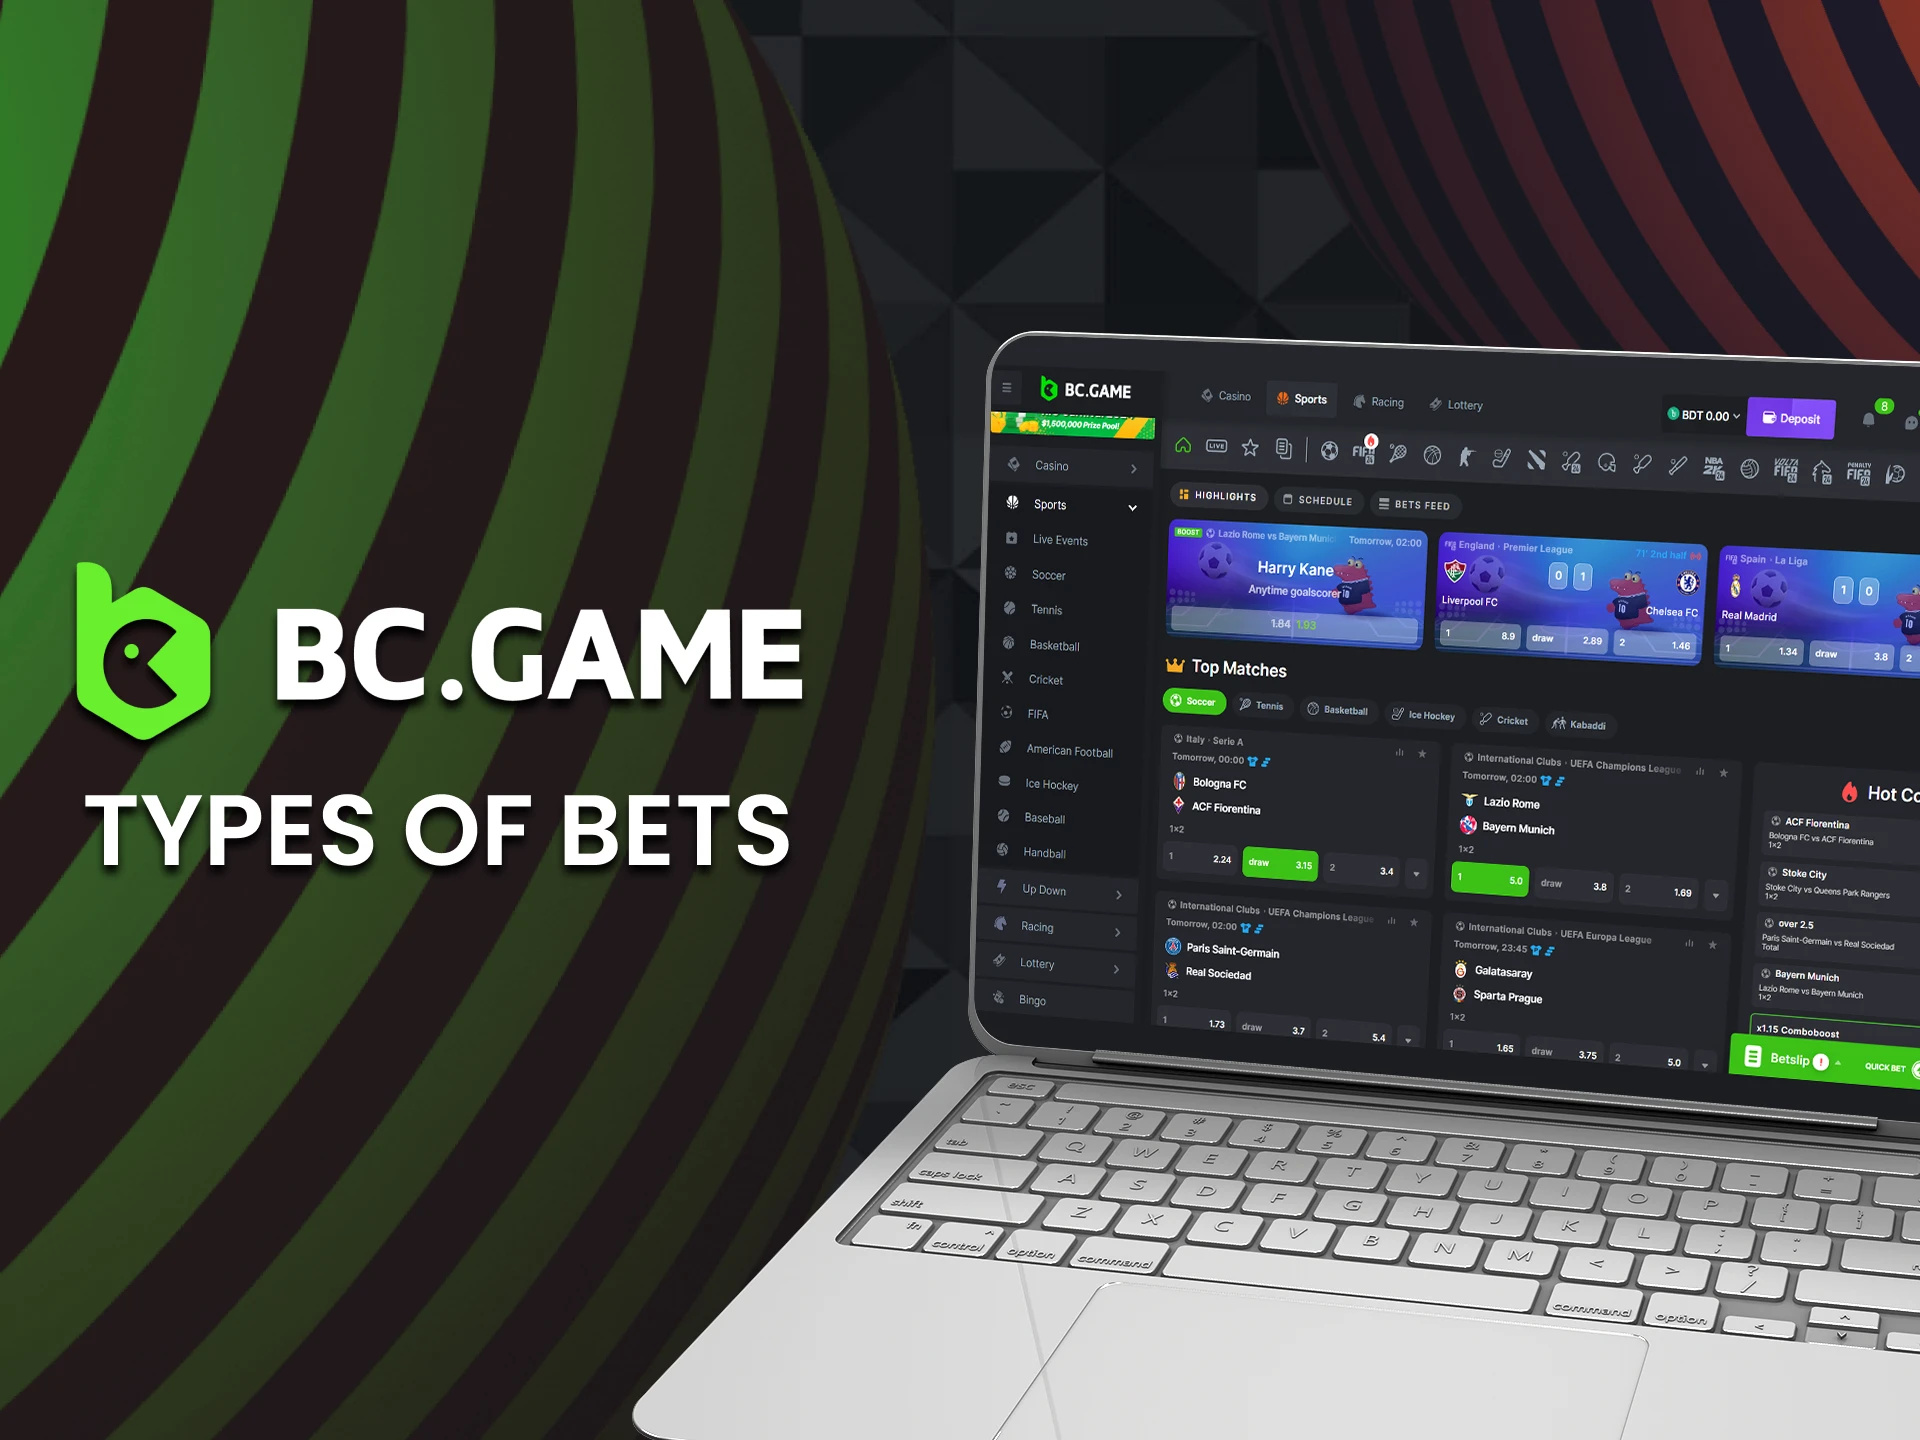 Learn about the types of bets available at BC Game.